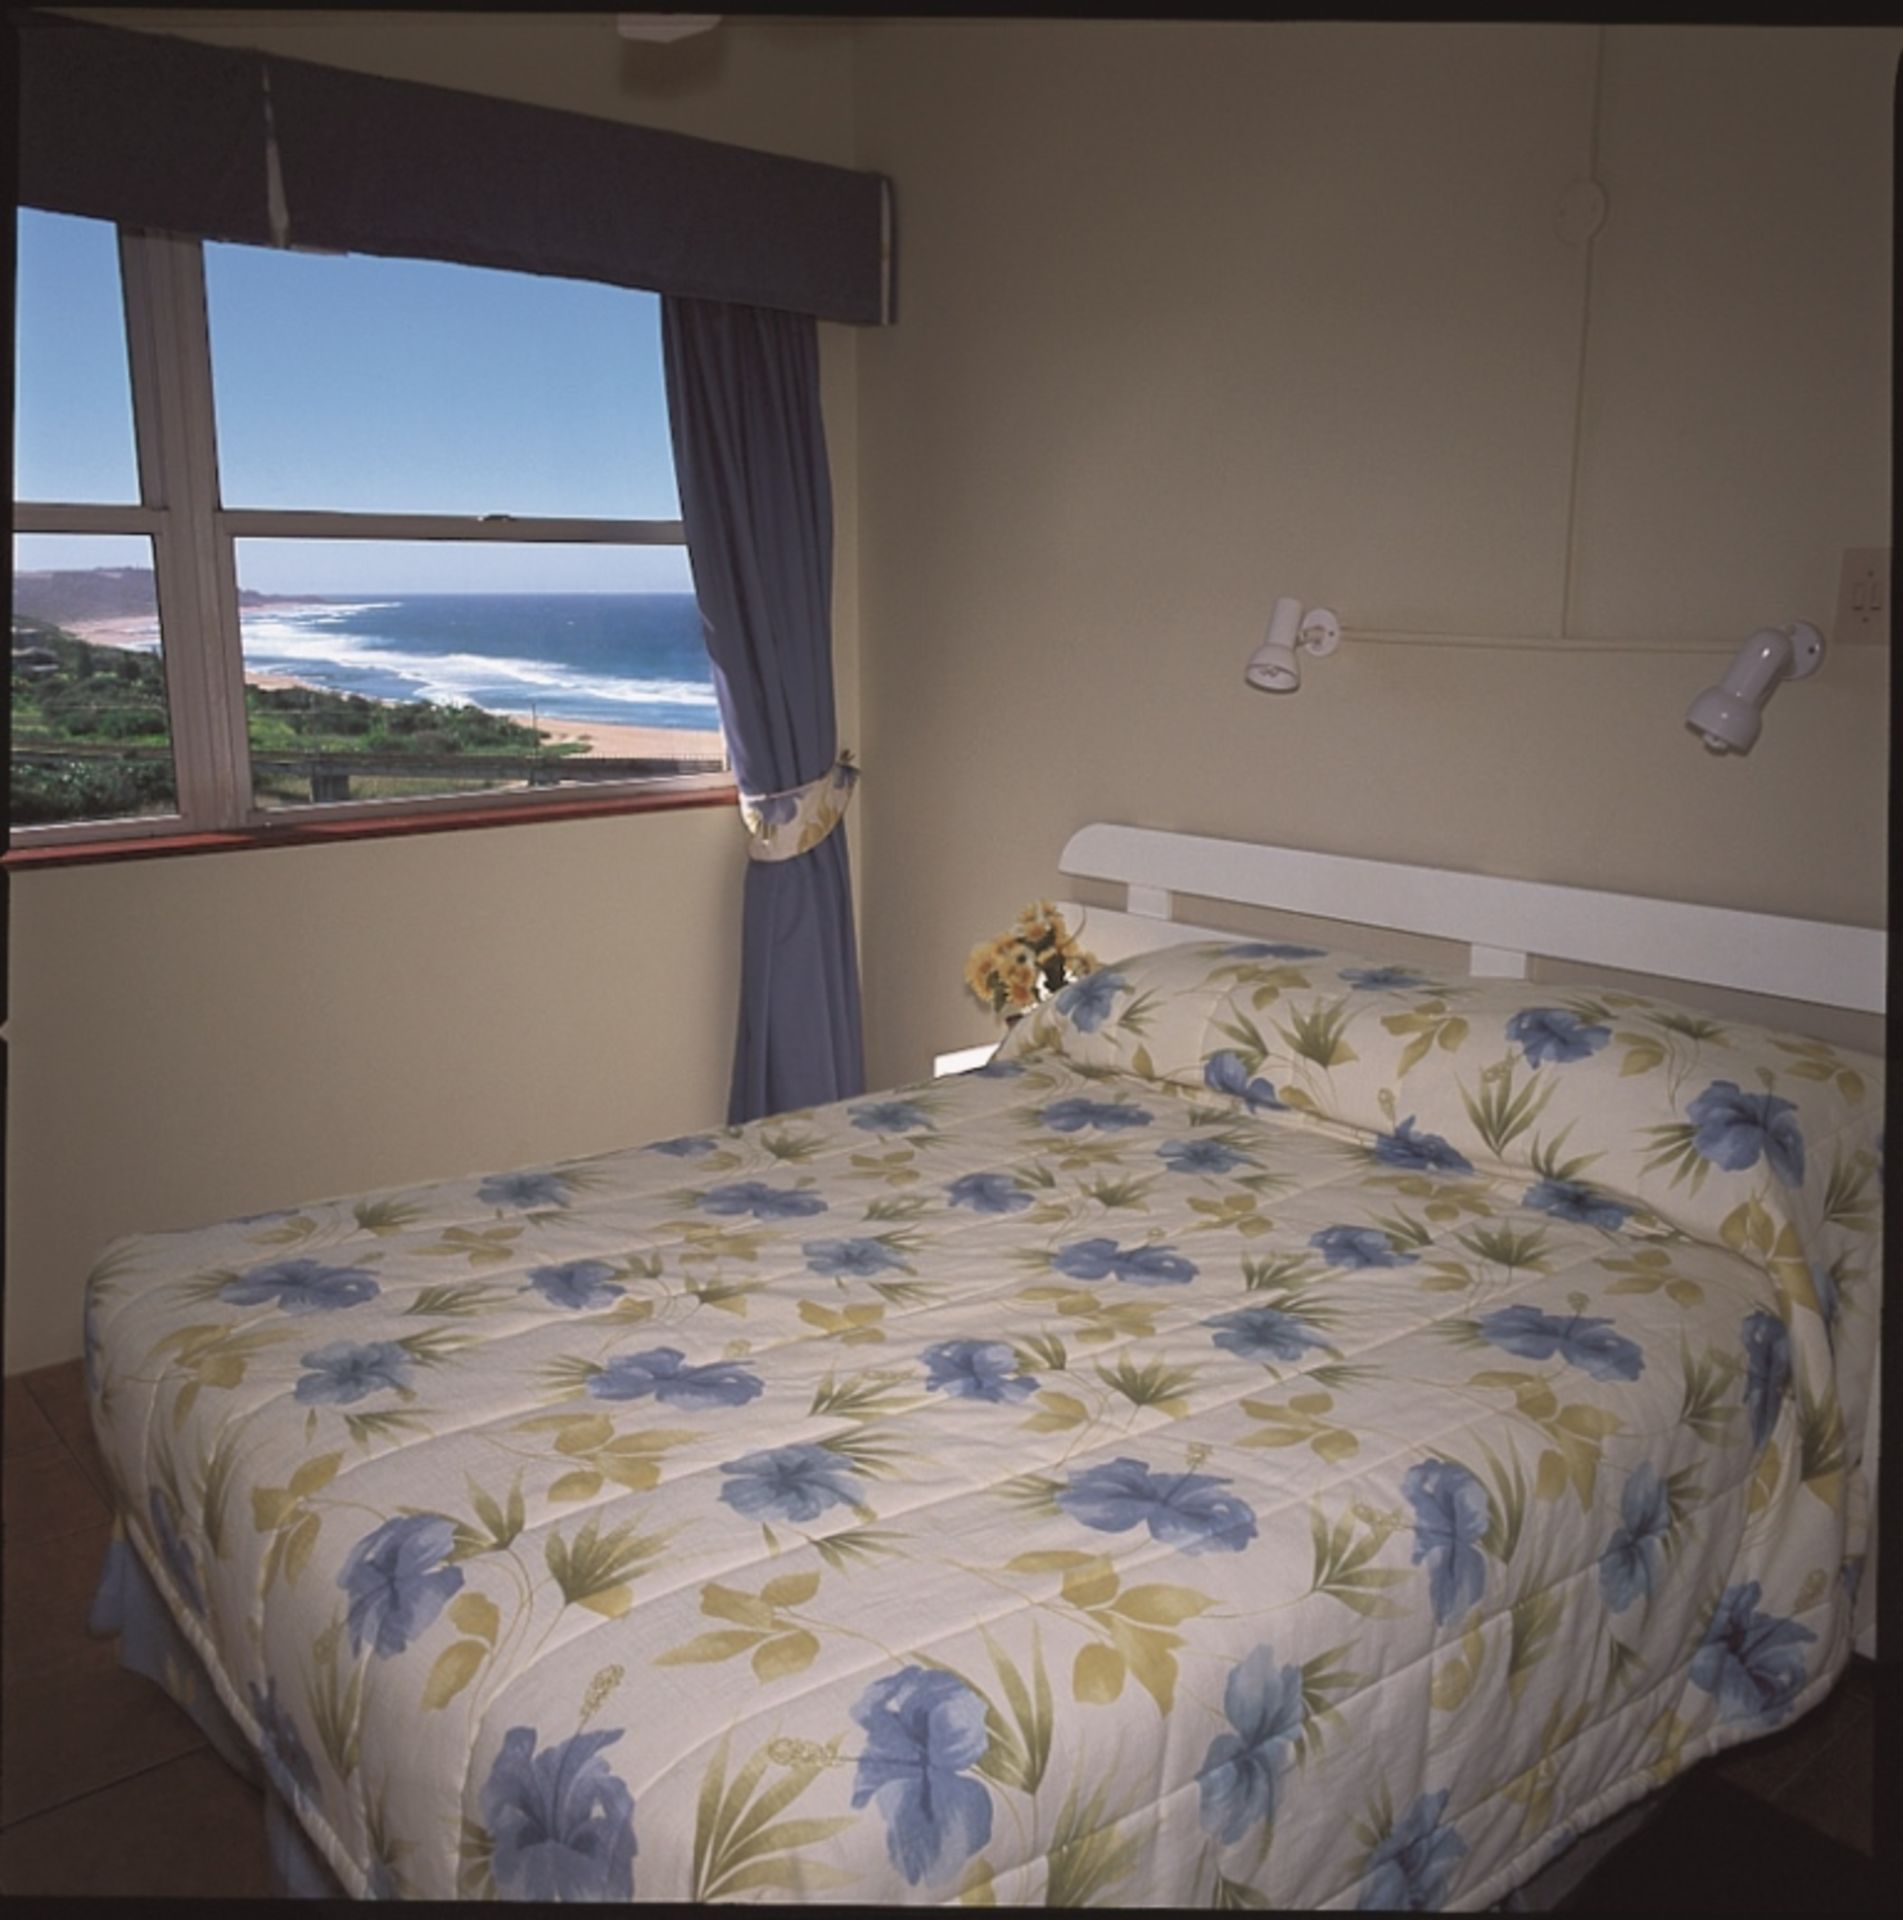 Pearly Shells - 1 Bed  (4 Sleepers Max) . Date - 15/07/2016 - 22/07/2016 - (Shareblock) - Image 27 of 32